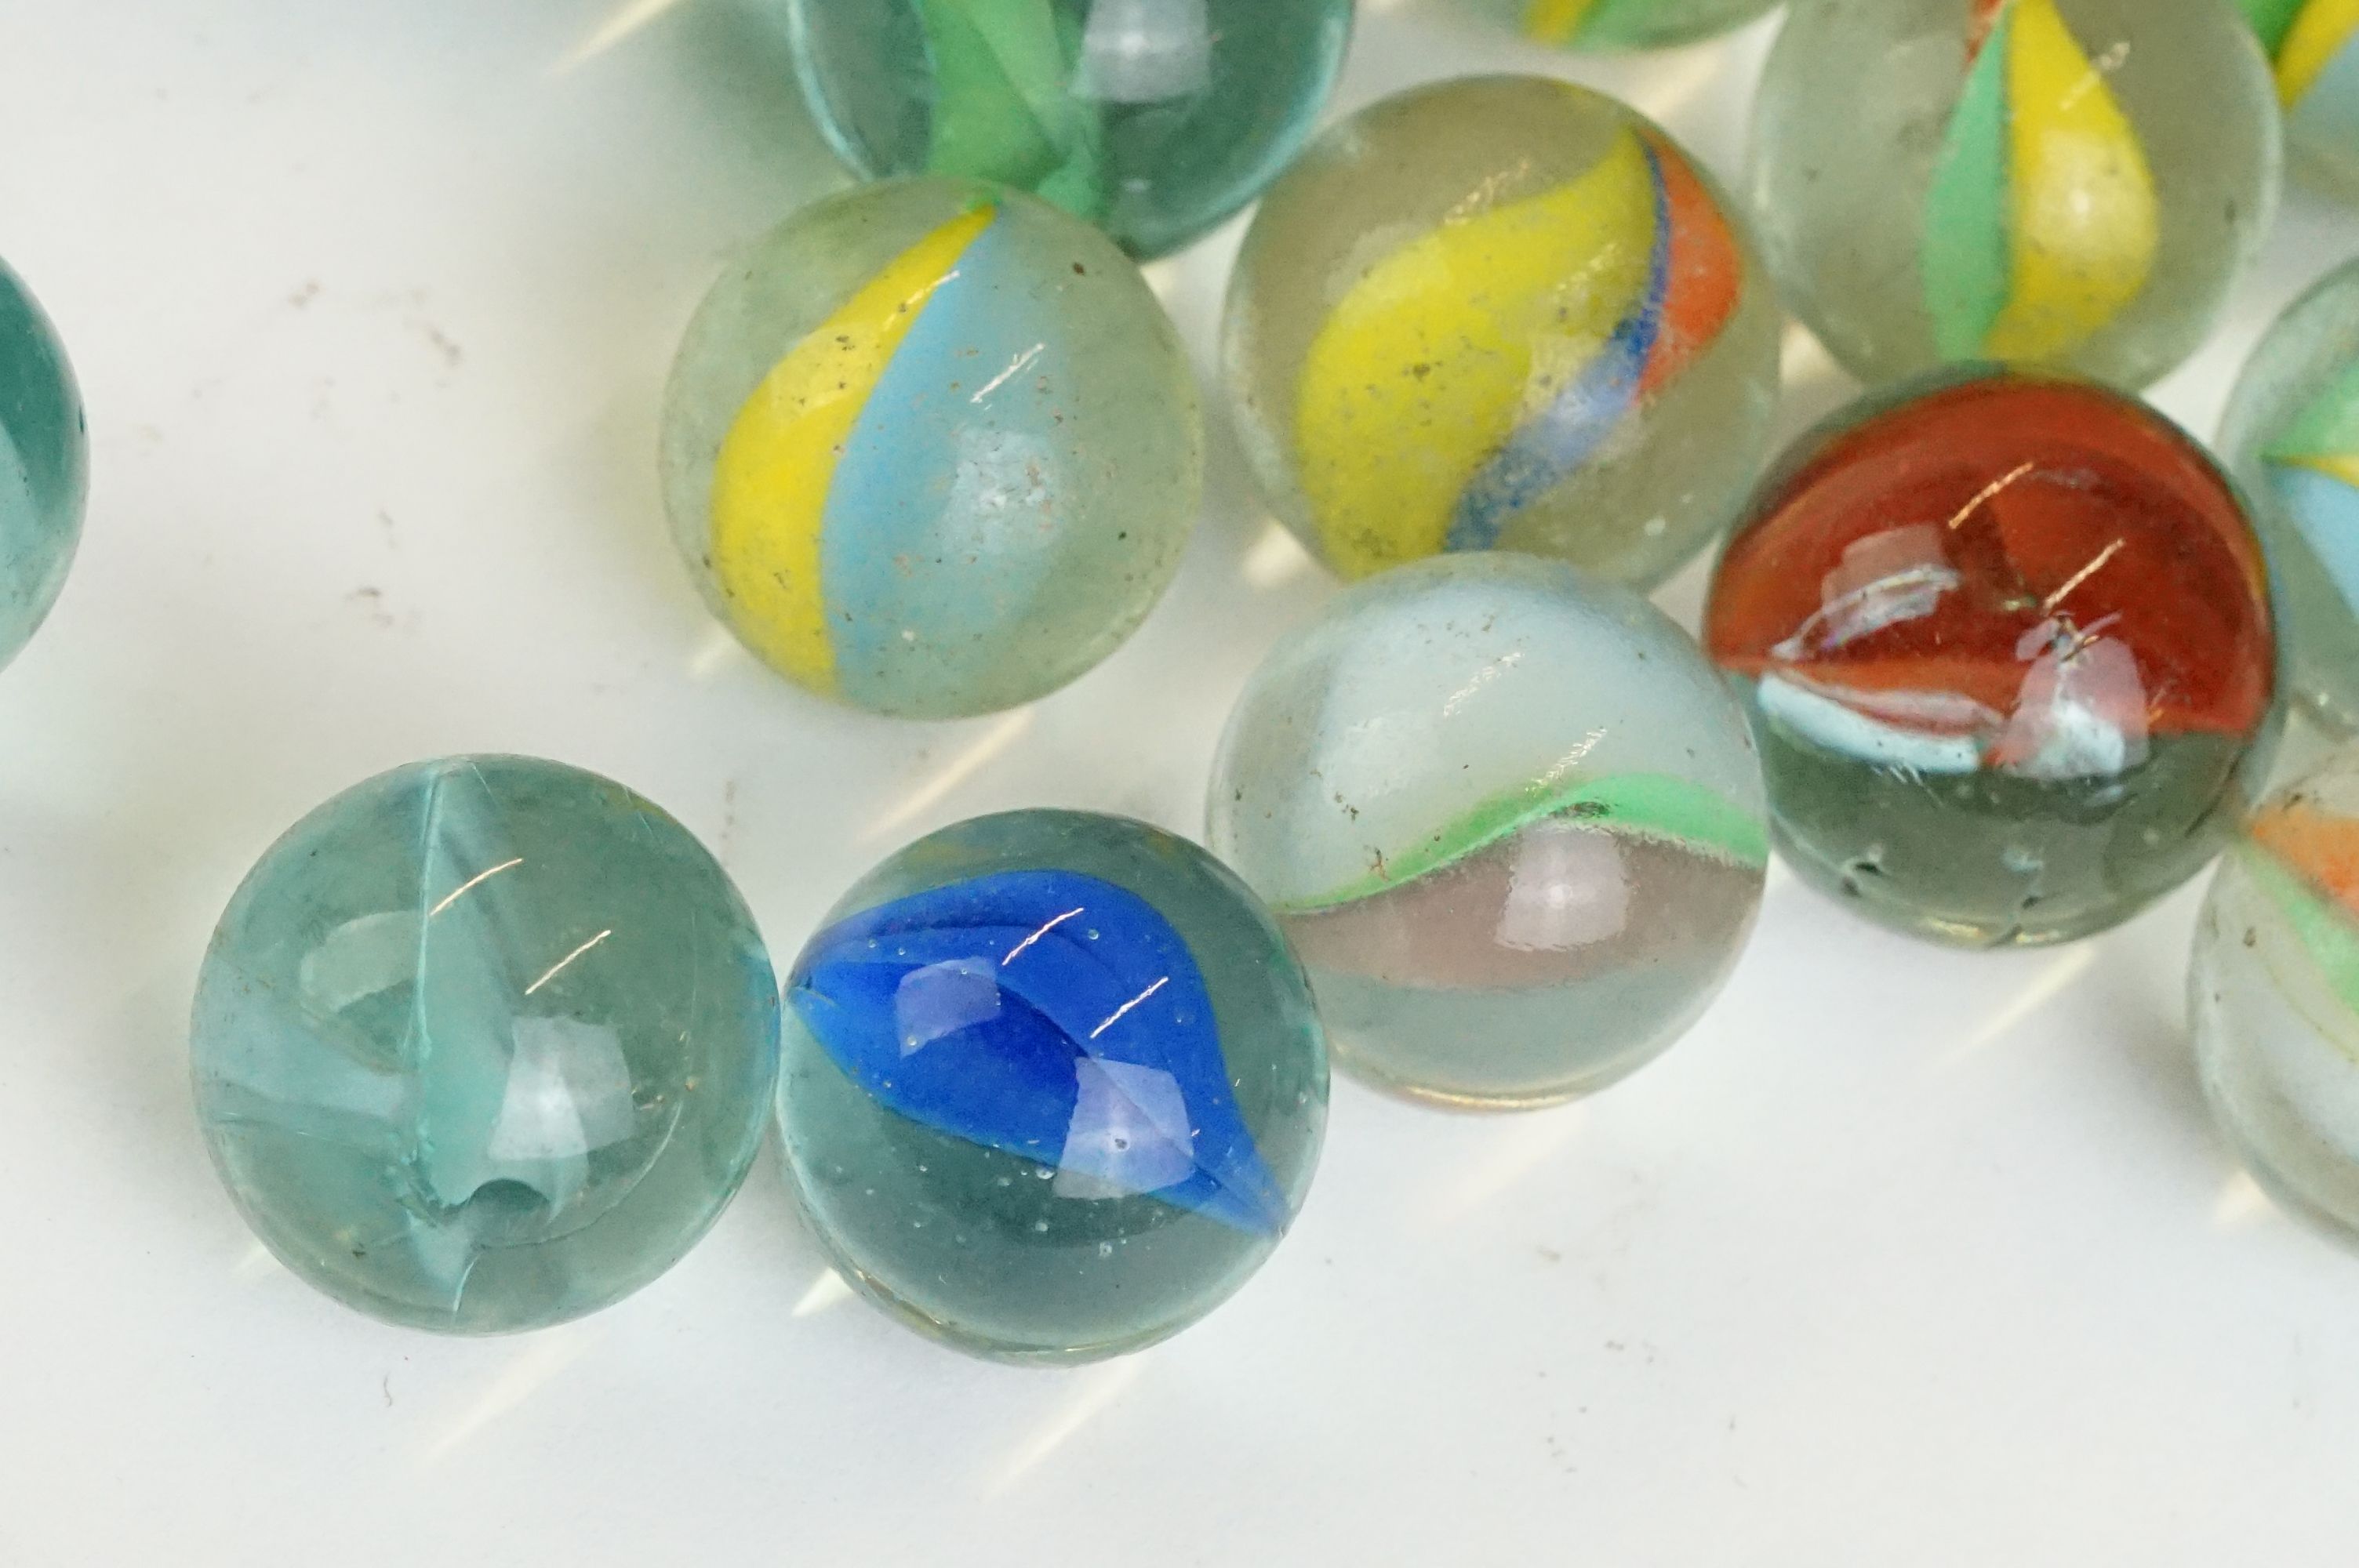 A small collection of vintage glass marbles contained within two bags. - Image 12 of 13